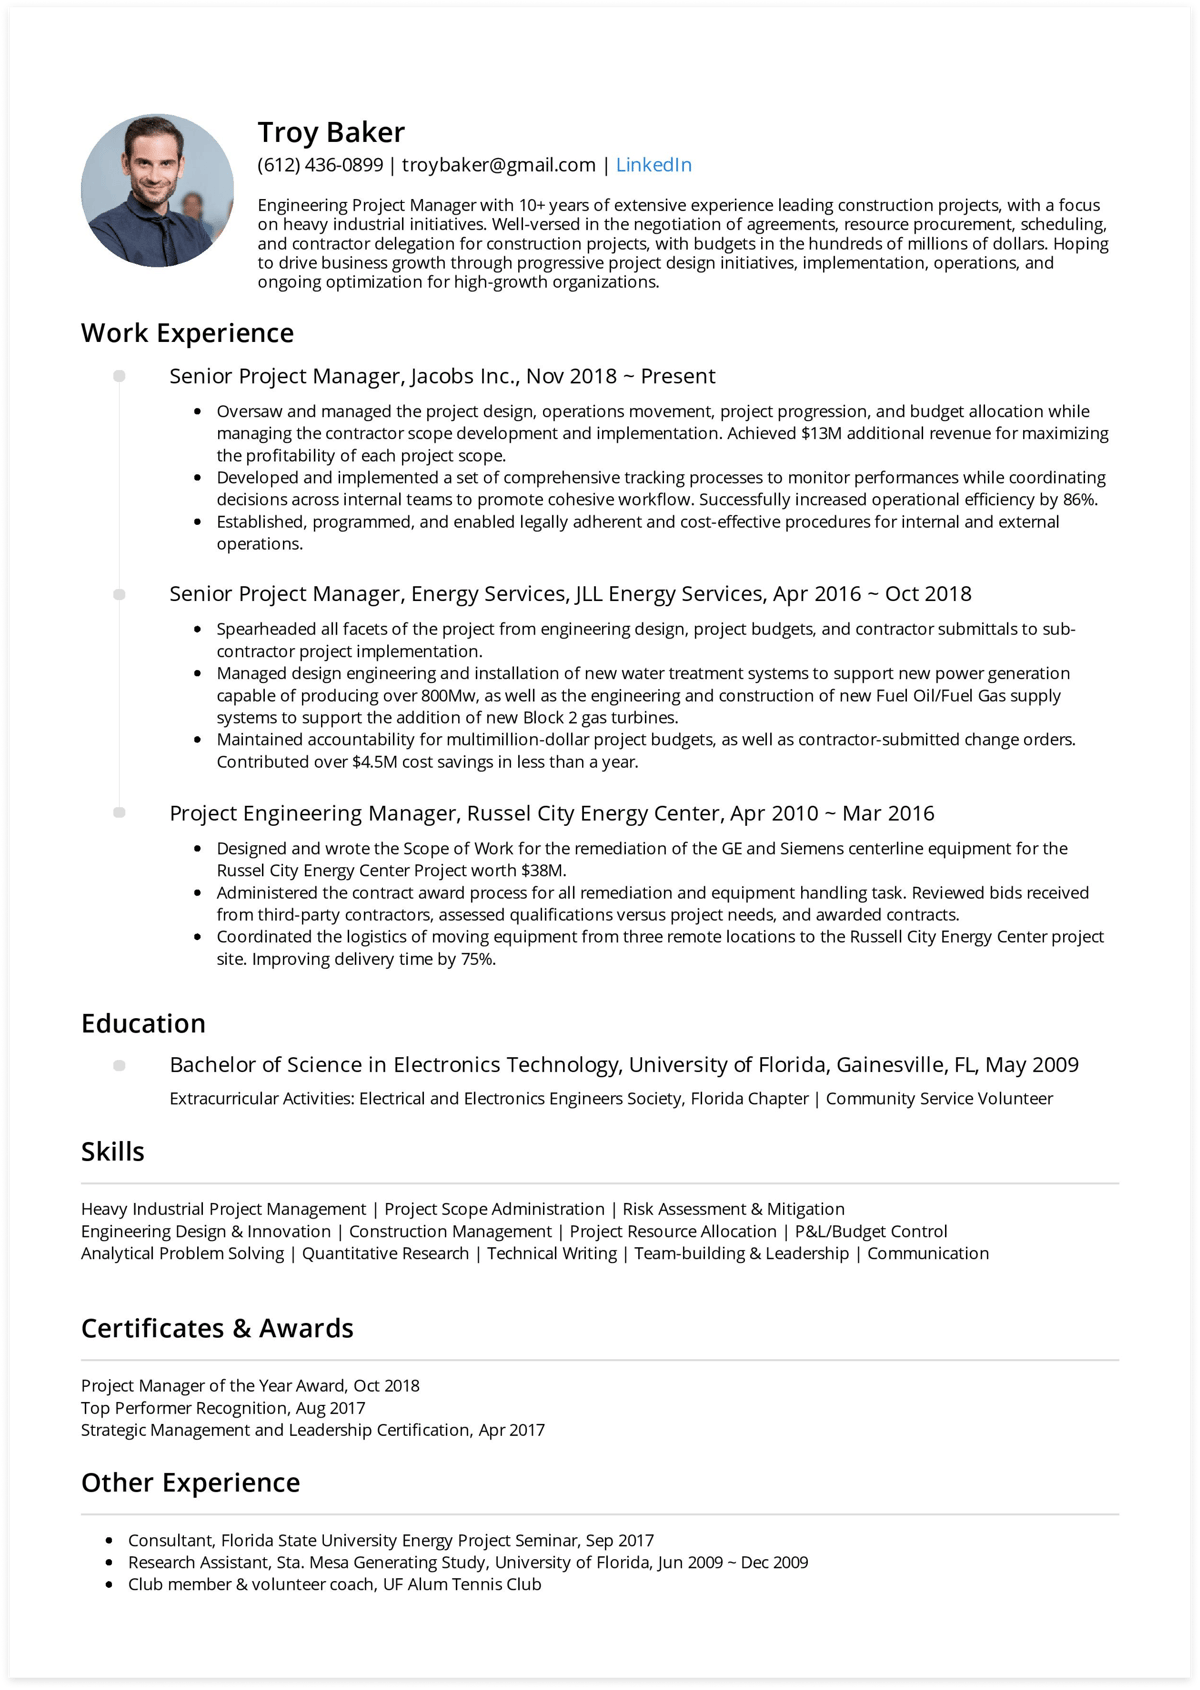 Click to download Project Manager resume example. Generated via CakeResume.